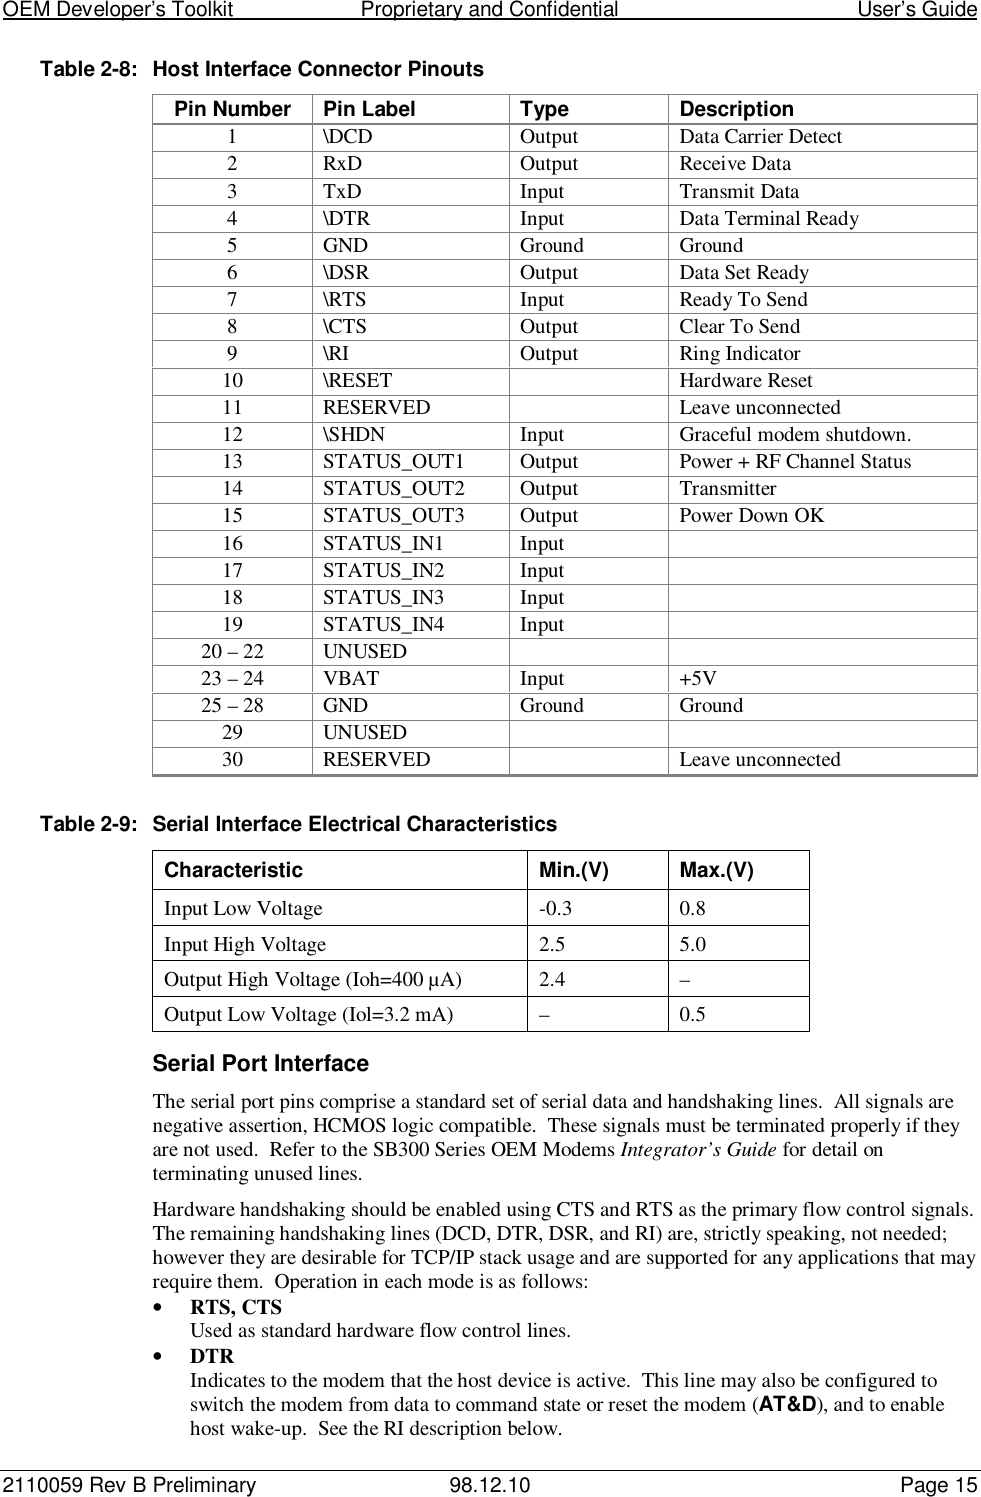 OEM Developer’s Toolkit                        Proprietary and Confidential                                        User’s Guide2110059 Rev B Preliminary 98.12.10 Page 15Table 2-8: Host Interface Connector PinoutsPin Number Pin Label Type Description1 \DCD Output Data Carrier Detect2 RxD Output Receive Data3 TxD Input Transmit Data4 \DTR Input Data Terminal Ready5 GND Ground Ground6 \DSR Output Data Set Ready7 \RTS Input Ready To Send8 \CTS Output Clear To Send9 \RI Output Ring Indicator10 \RESET Hardware Reset11 RESERVED Leave unconnected12 \SHDN Input Graceful modem shutdown.13 STATUS_OUT1 Output Power + RF Channel Status14 STATUS_OUT2 Output Transmitter15 STATUS_OUT3 Output Power Down OK16 STATUS_IN1 Input17 STATUS_IN2 Input18 STATUS_IN3 Input19 STATUS_IN4 Input20 – 22 UNUSED23 – 24 VBAT Input +5V25 – 28 GND Ground Ground29 UNUSED30 RESERVED Leave unconnectedTable 2-9: Serial Interface Electrical CharacteristicsCharacteristic Min.(V) Max.(V)Input Low Voltage -0.3 0.8Input High Voltage 2.5 5.0Output High Voltage (Ioh=400 µA) 2.4 –Output Low Voltage (Iol=3.2 mA) – 0.5Serial Port InterfaceThe serial port pins comprise a standard set of serial data and handshaking lines.  All signals arenegative assertion, HCMOS logic compatible.  These signals must be terminated properly if theyare not used.  Refer to the SB300 Series OEM Modems Integrator’s Guide for detail onterminating unused lines.Hardware handshaking should be enabled using CTS and RTS as the primary flow control signals.The remaining handshaking lines (DCD, DTR, DSR, and RI) are, strictly speaking, not needed;however they are desirable for TCP/IP stack usage and are supported for any applications that mayrequire them.  Operation in each mode is as follows:• RTS, CTSUsed as standard hardware flow control lines.• DTRIndicates to the modem that the host device is active.  This line may also be configured toswitch the modem from data to command state or reset the modem (AT&amp;D), and to enablehost wake-up.  See the RI description below.